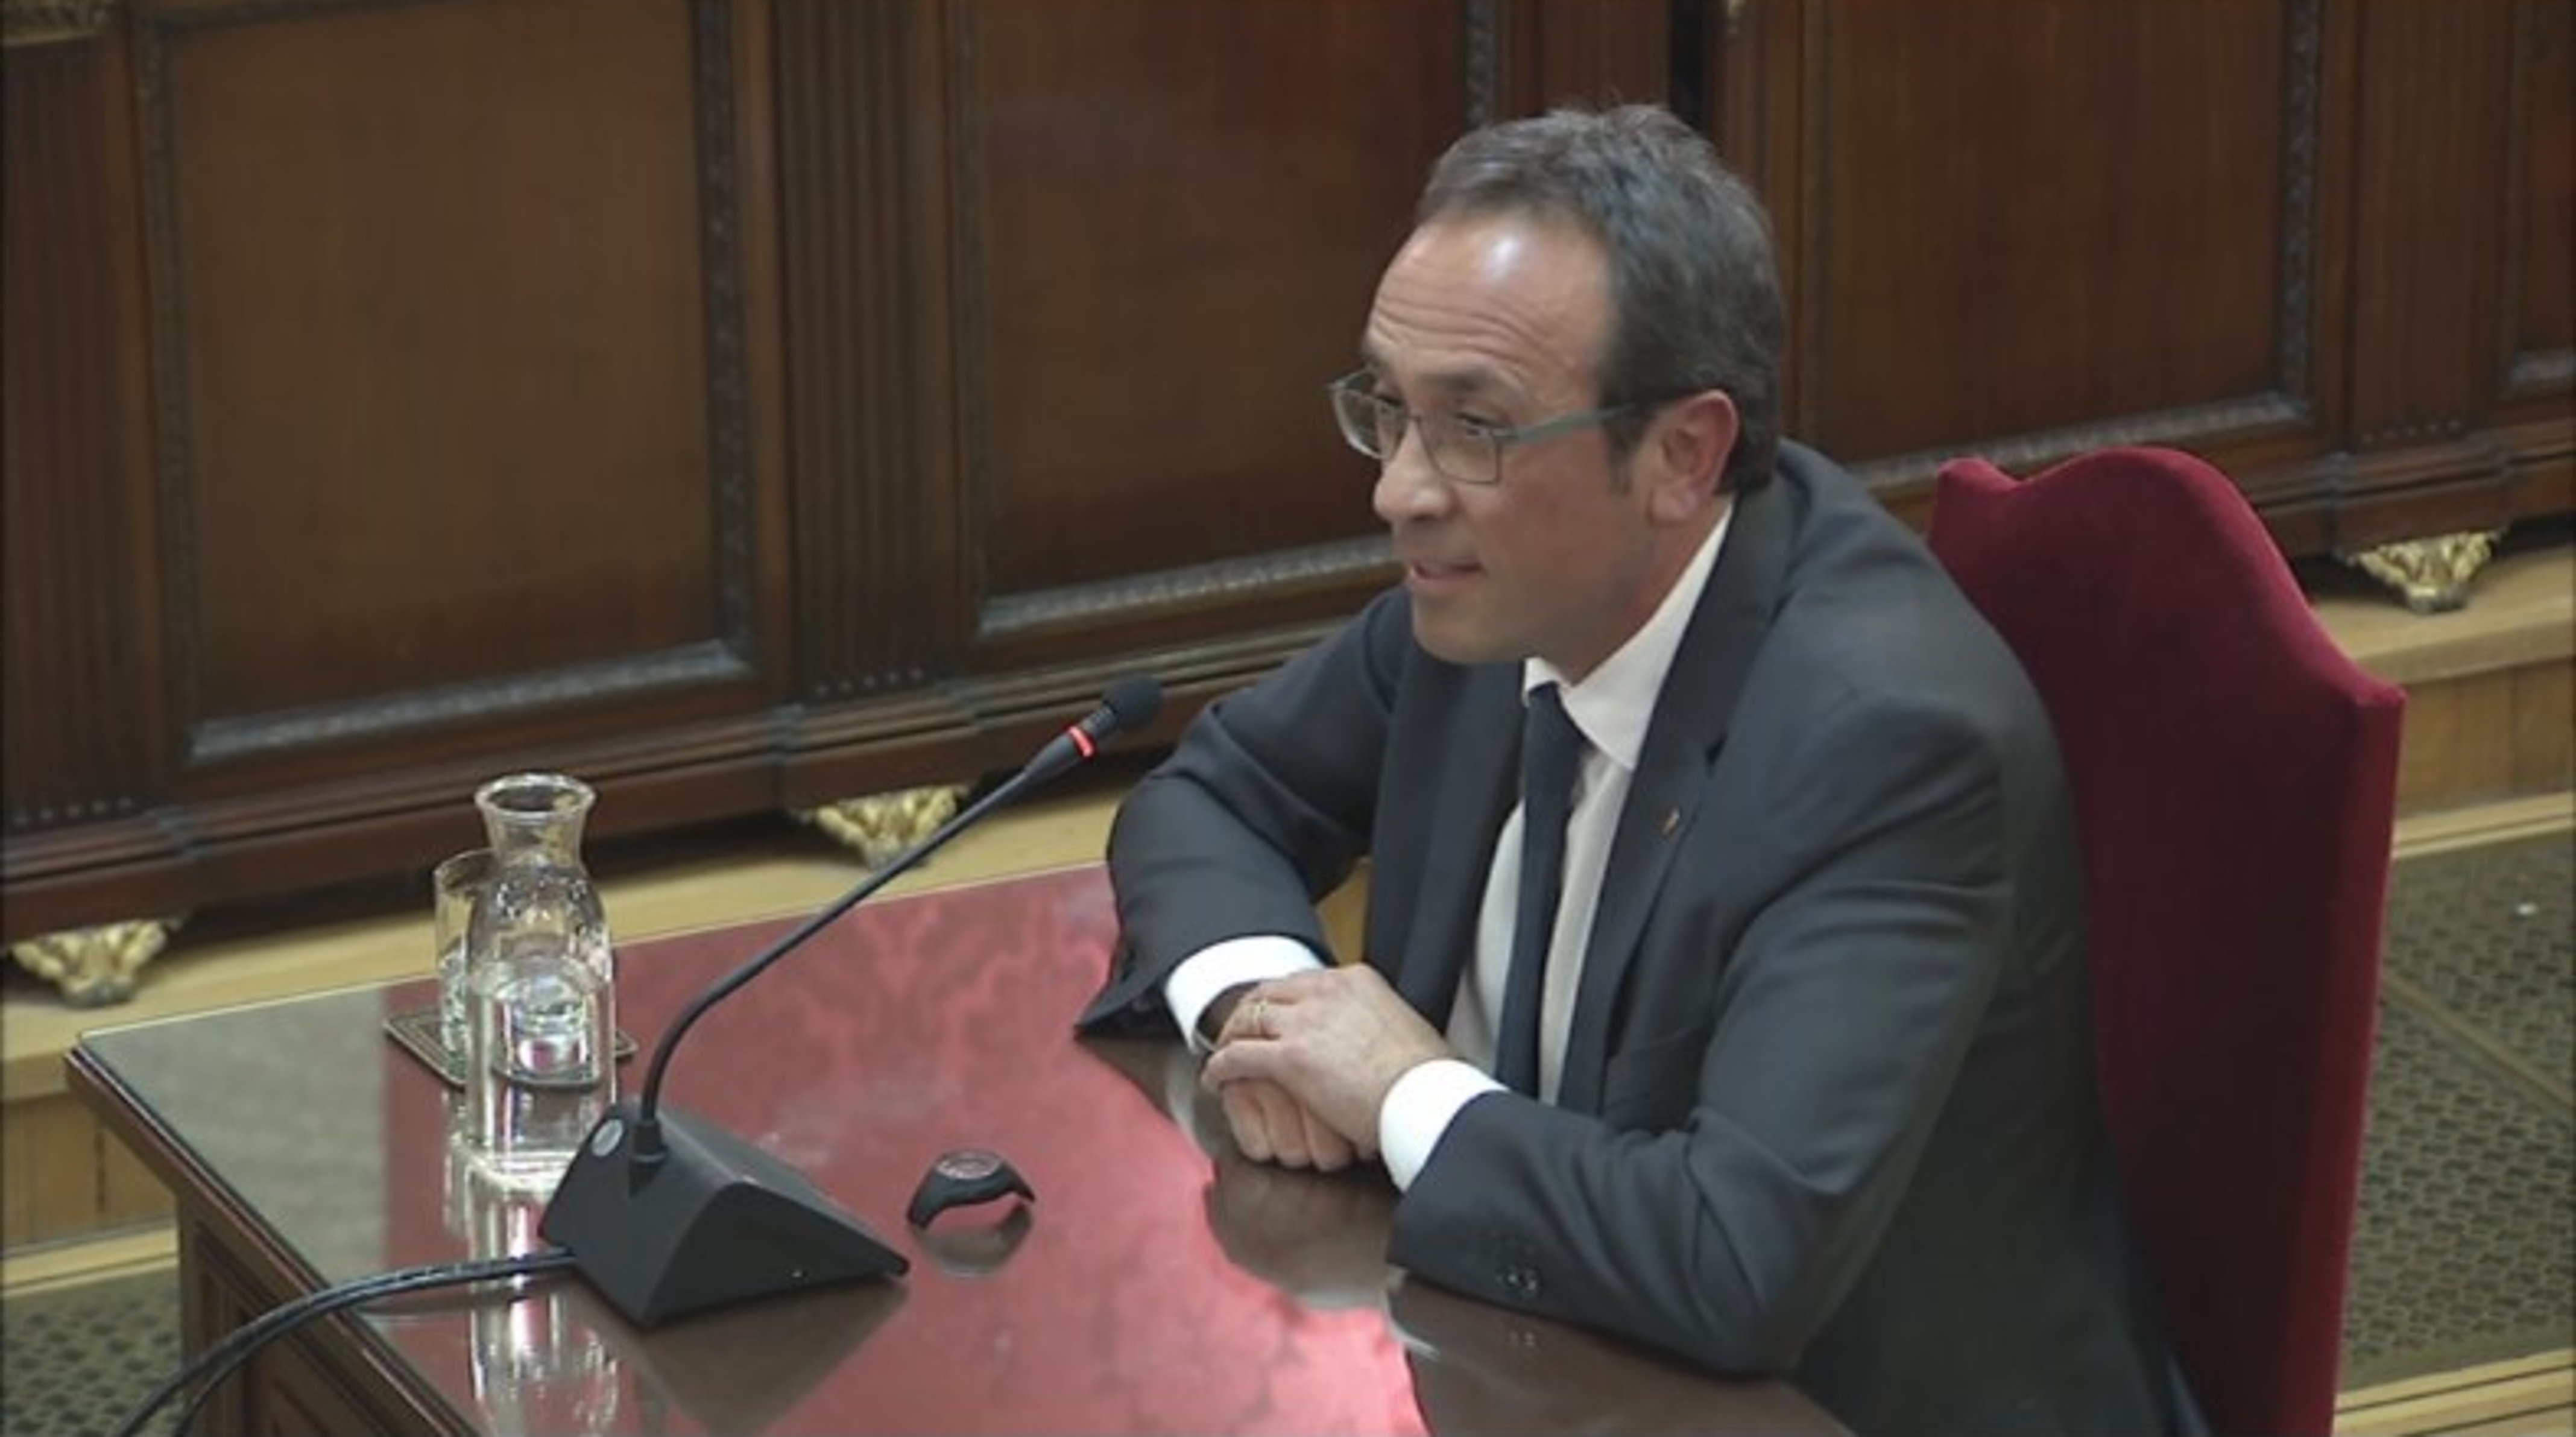 Josep Rull giving his closing statement in Spain's Supreme Court on June 12, 2019 (Supreme Court)